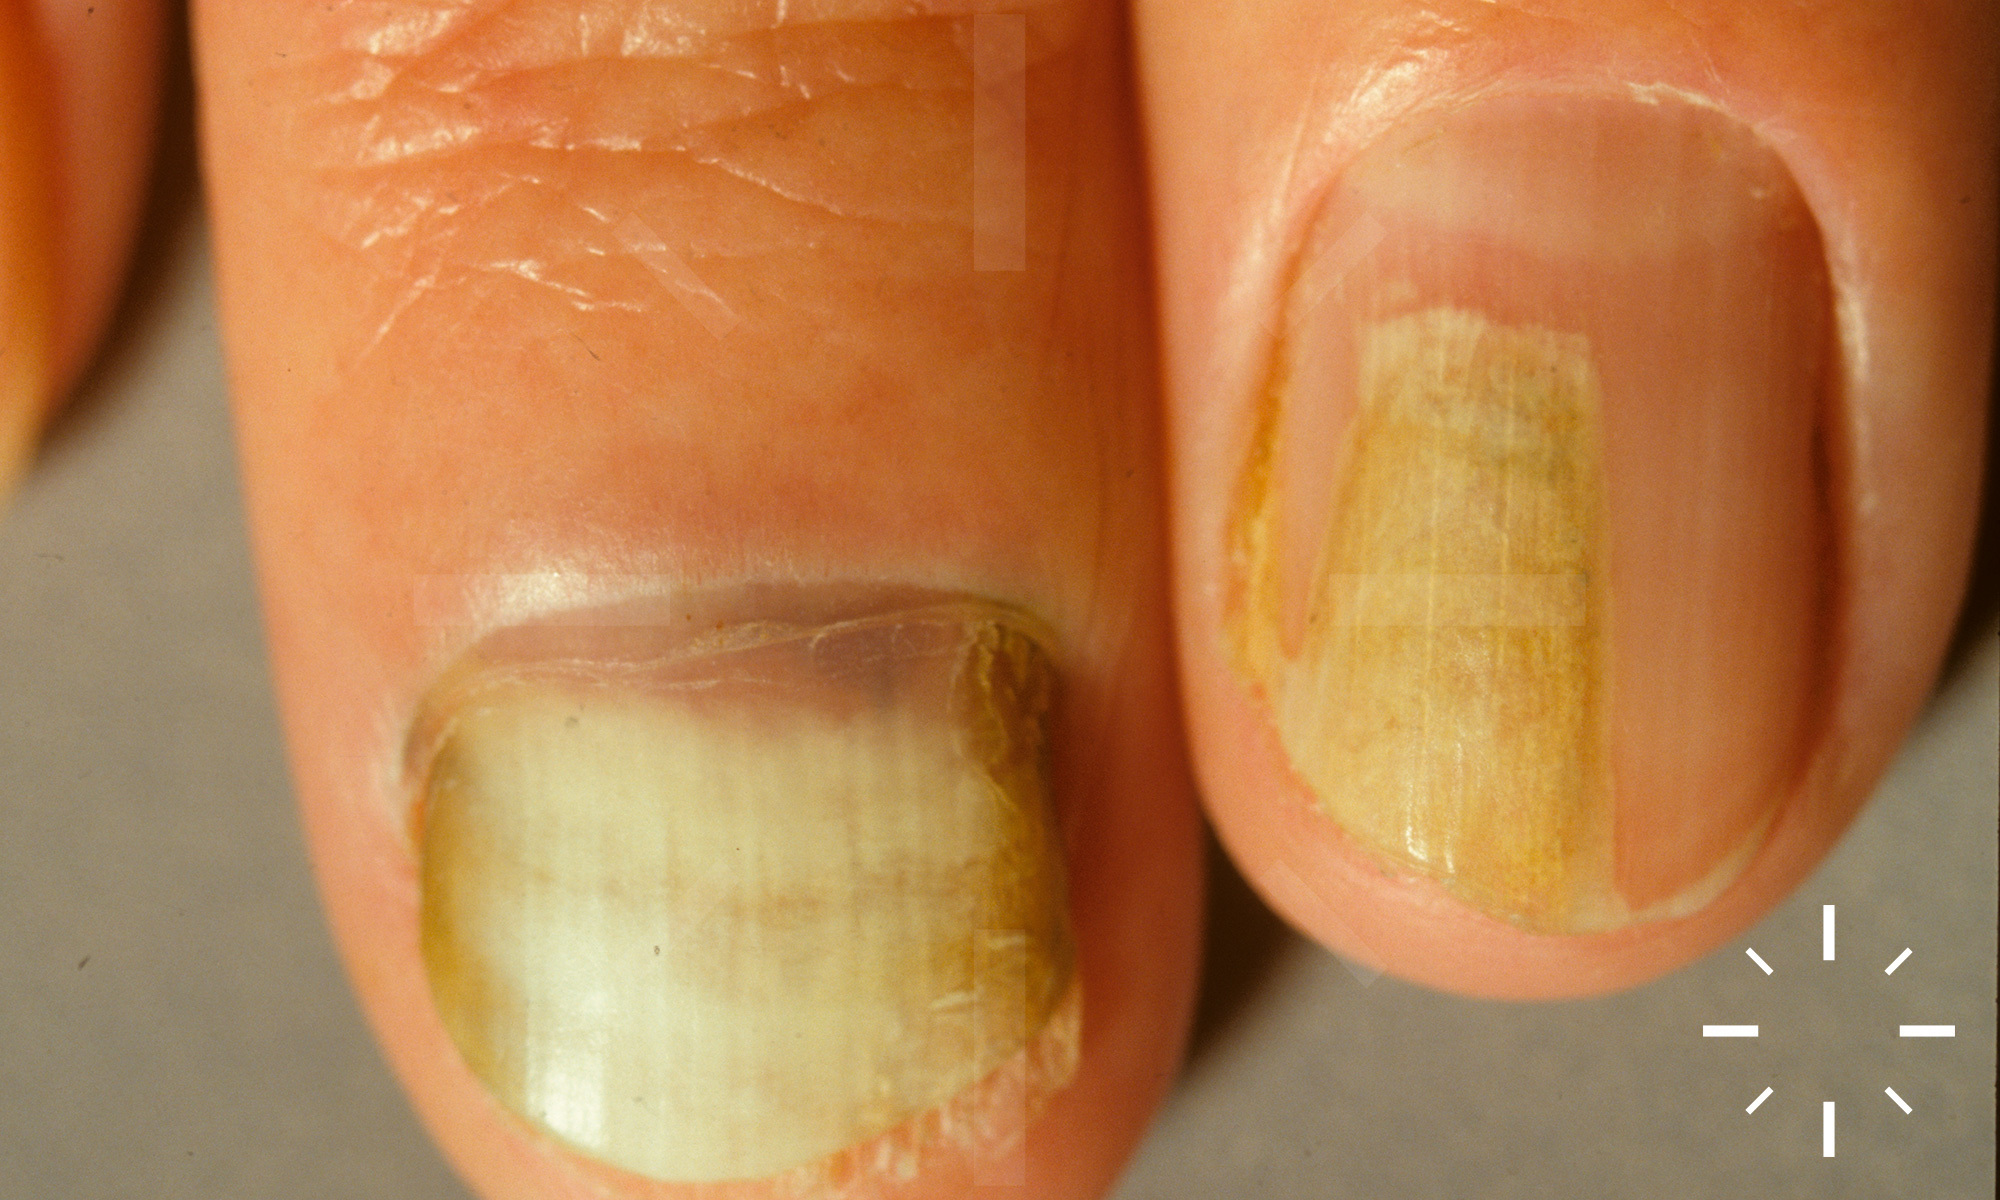 VW Dermatology - Onychomycosis, also known as tinea unguium, is a fungal  infection of the nail. Symptoms may include white or yellow nail  discoloration, thickening of the nail, and separation of the